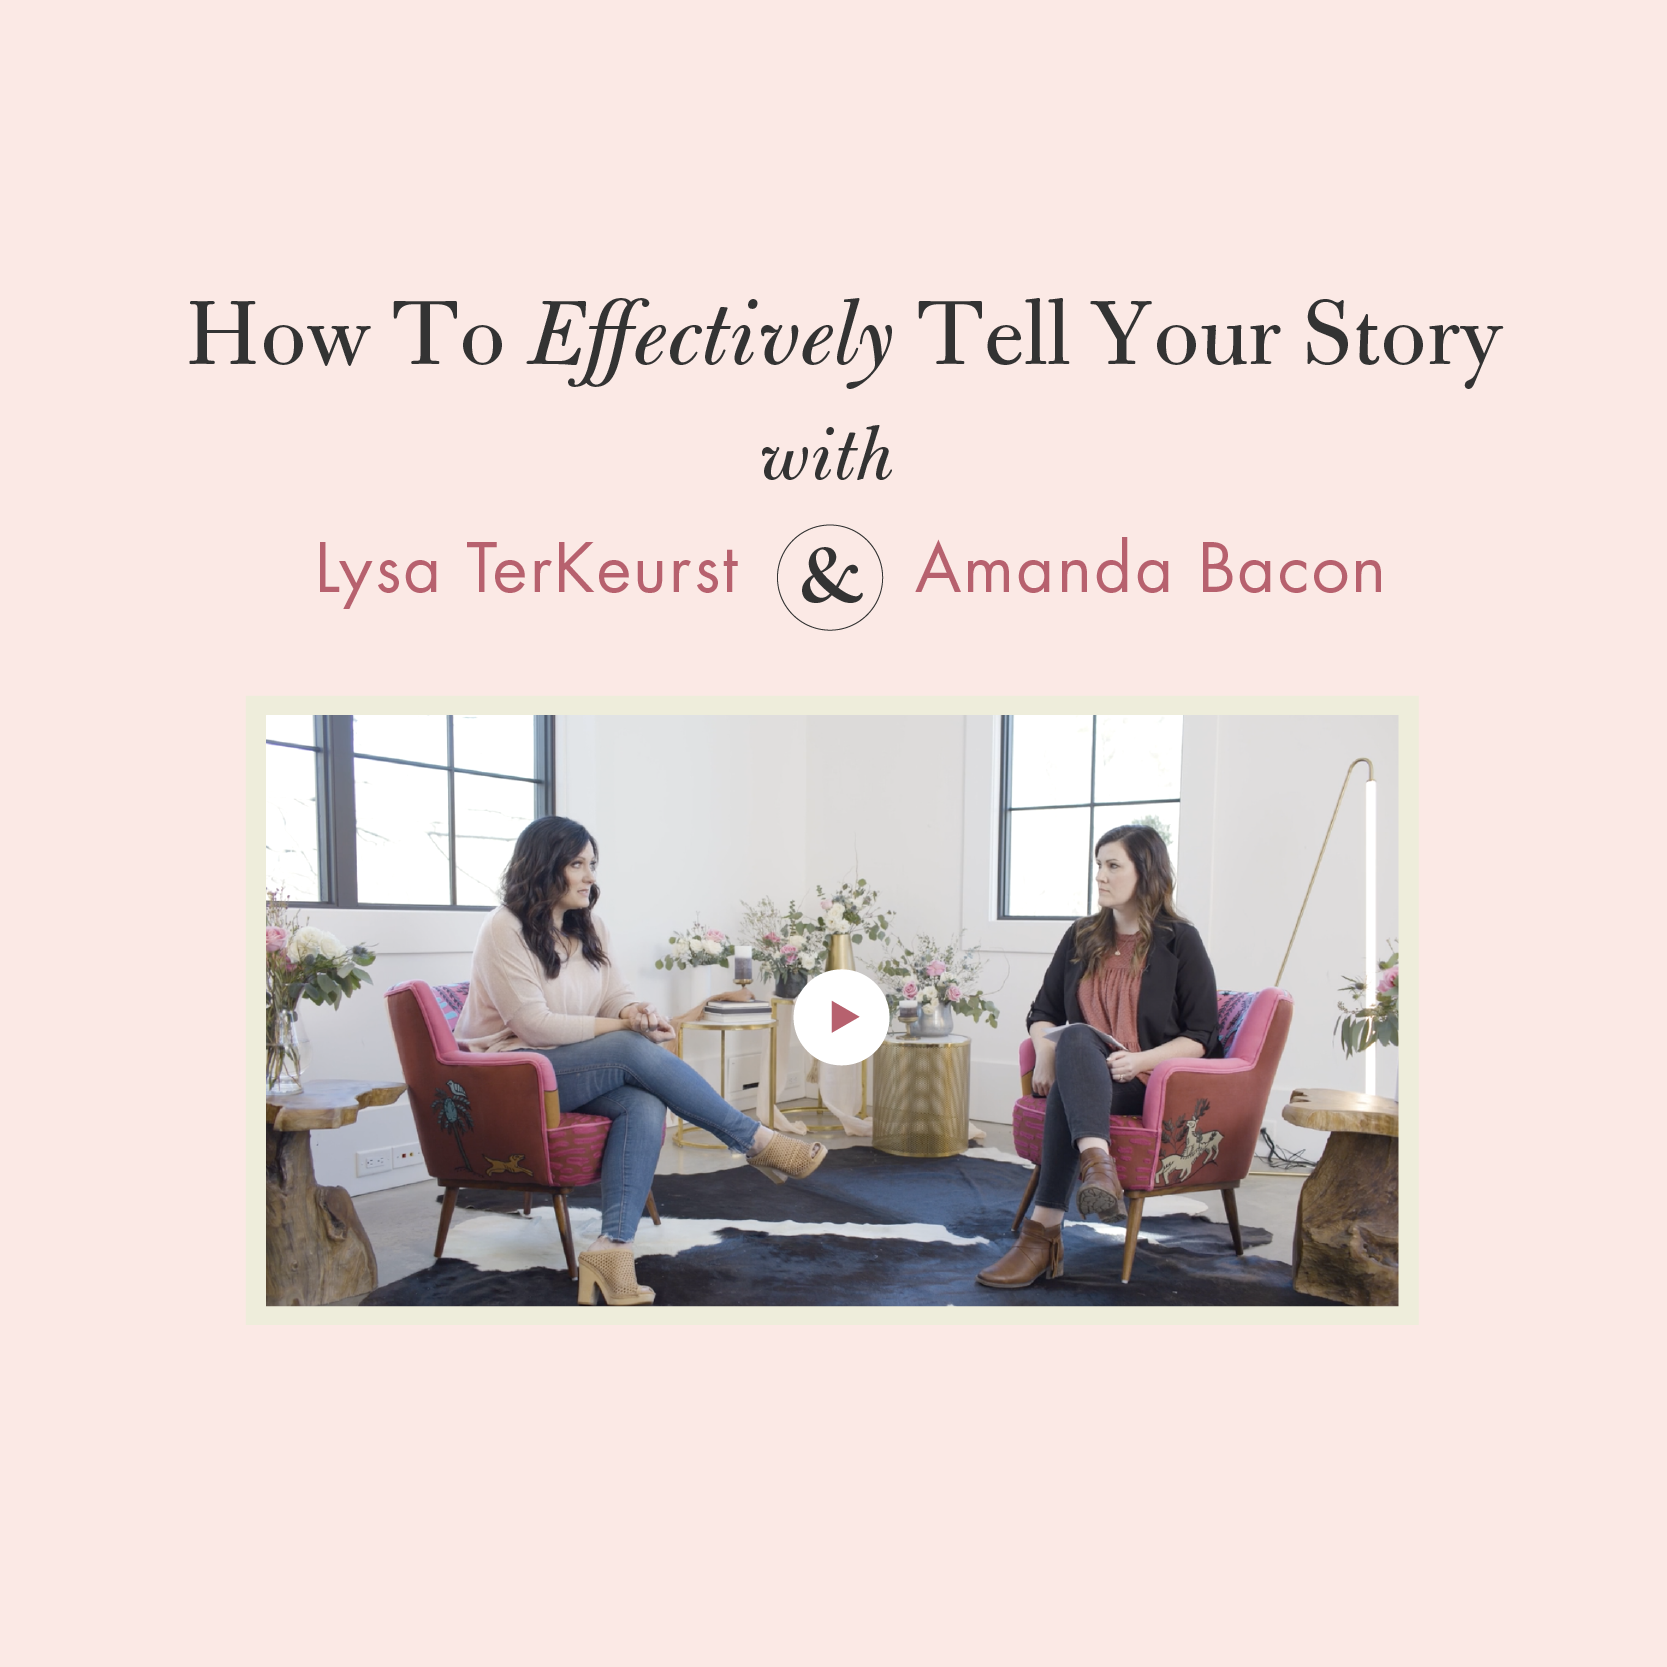 Ever wondered how to effectively tell your story through your writing?